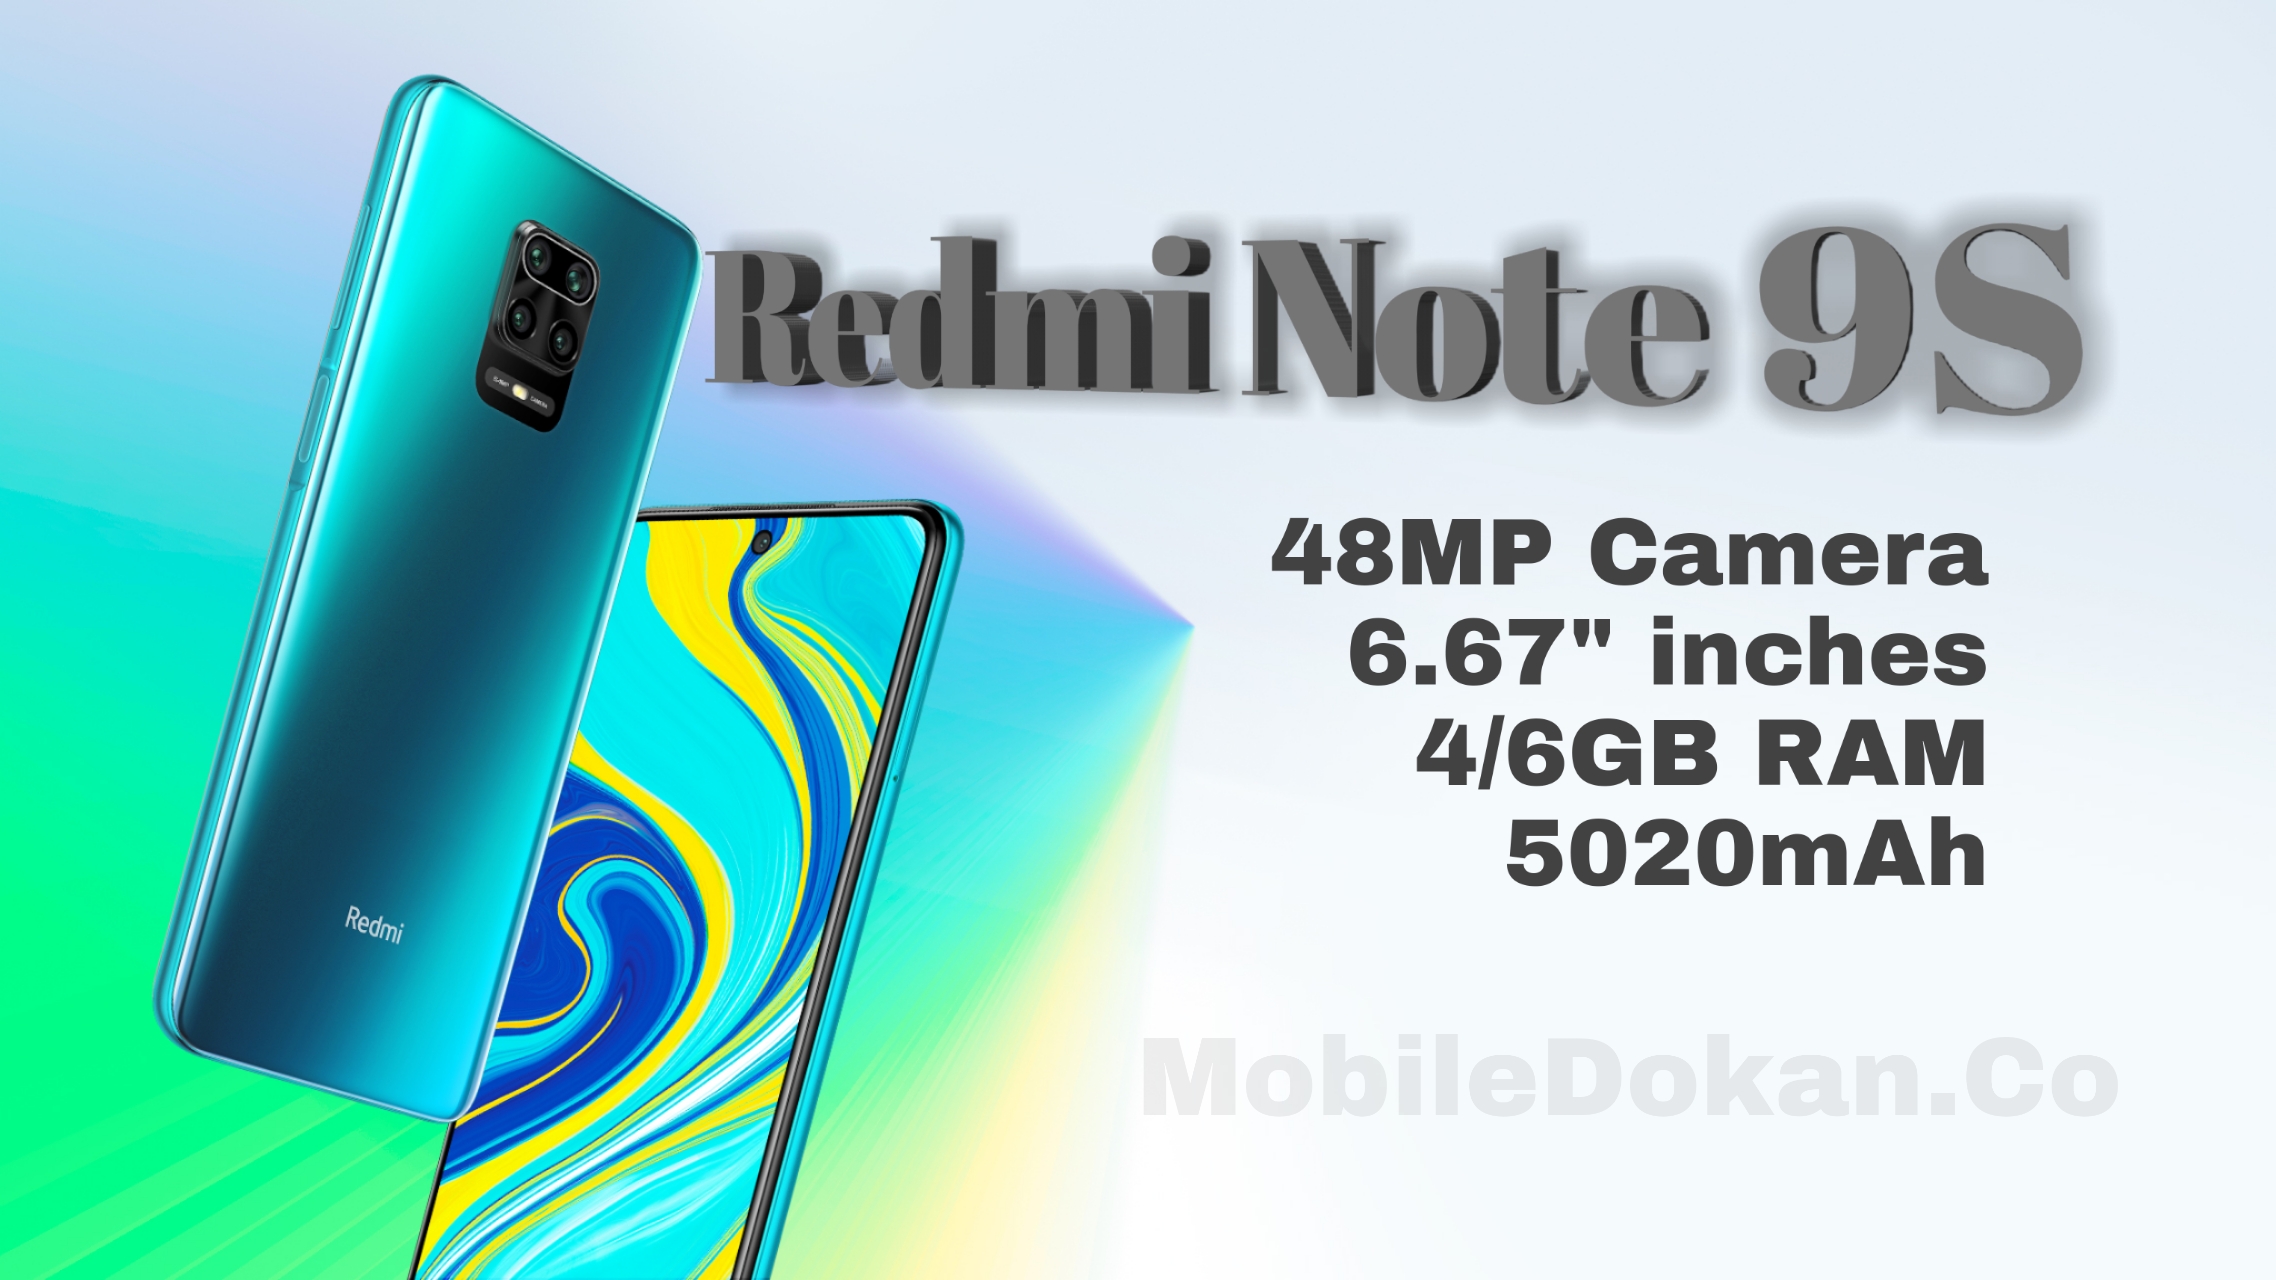 Redmi Note 9S Launched